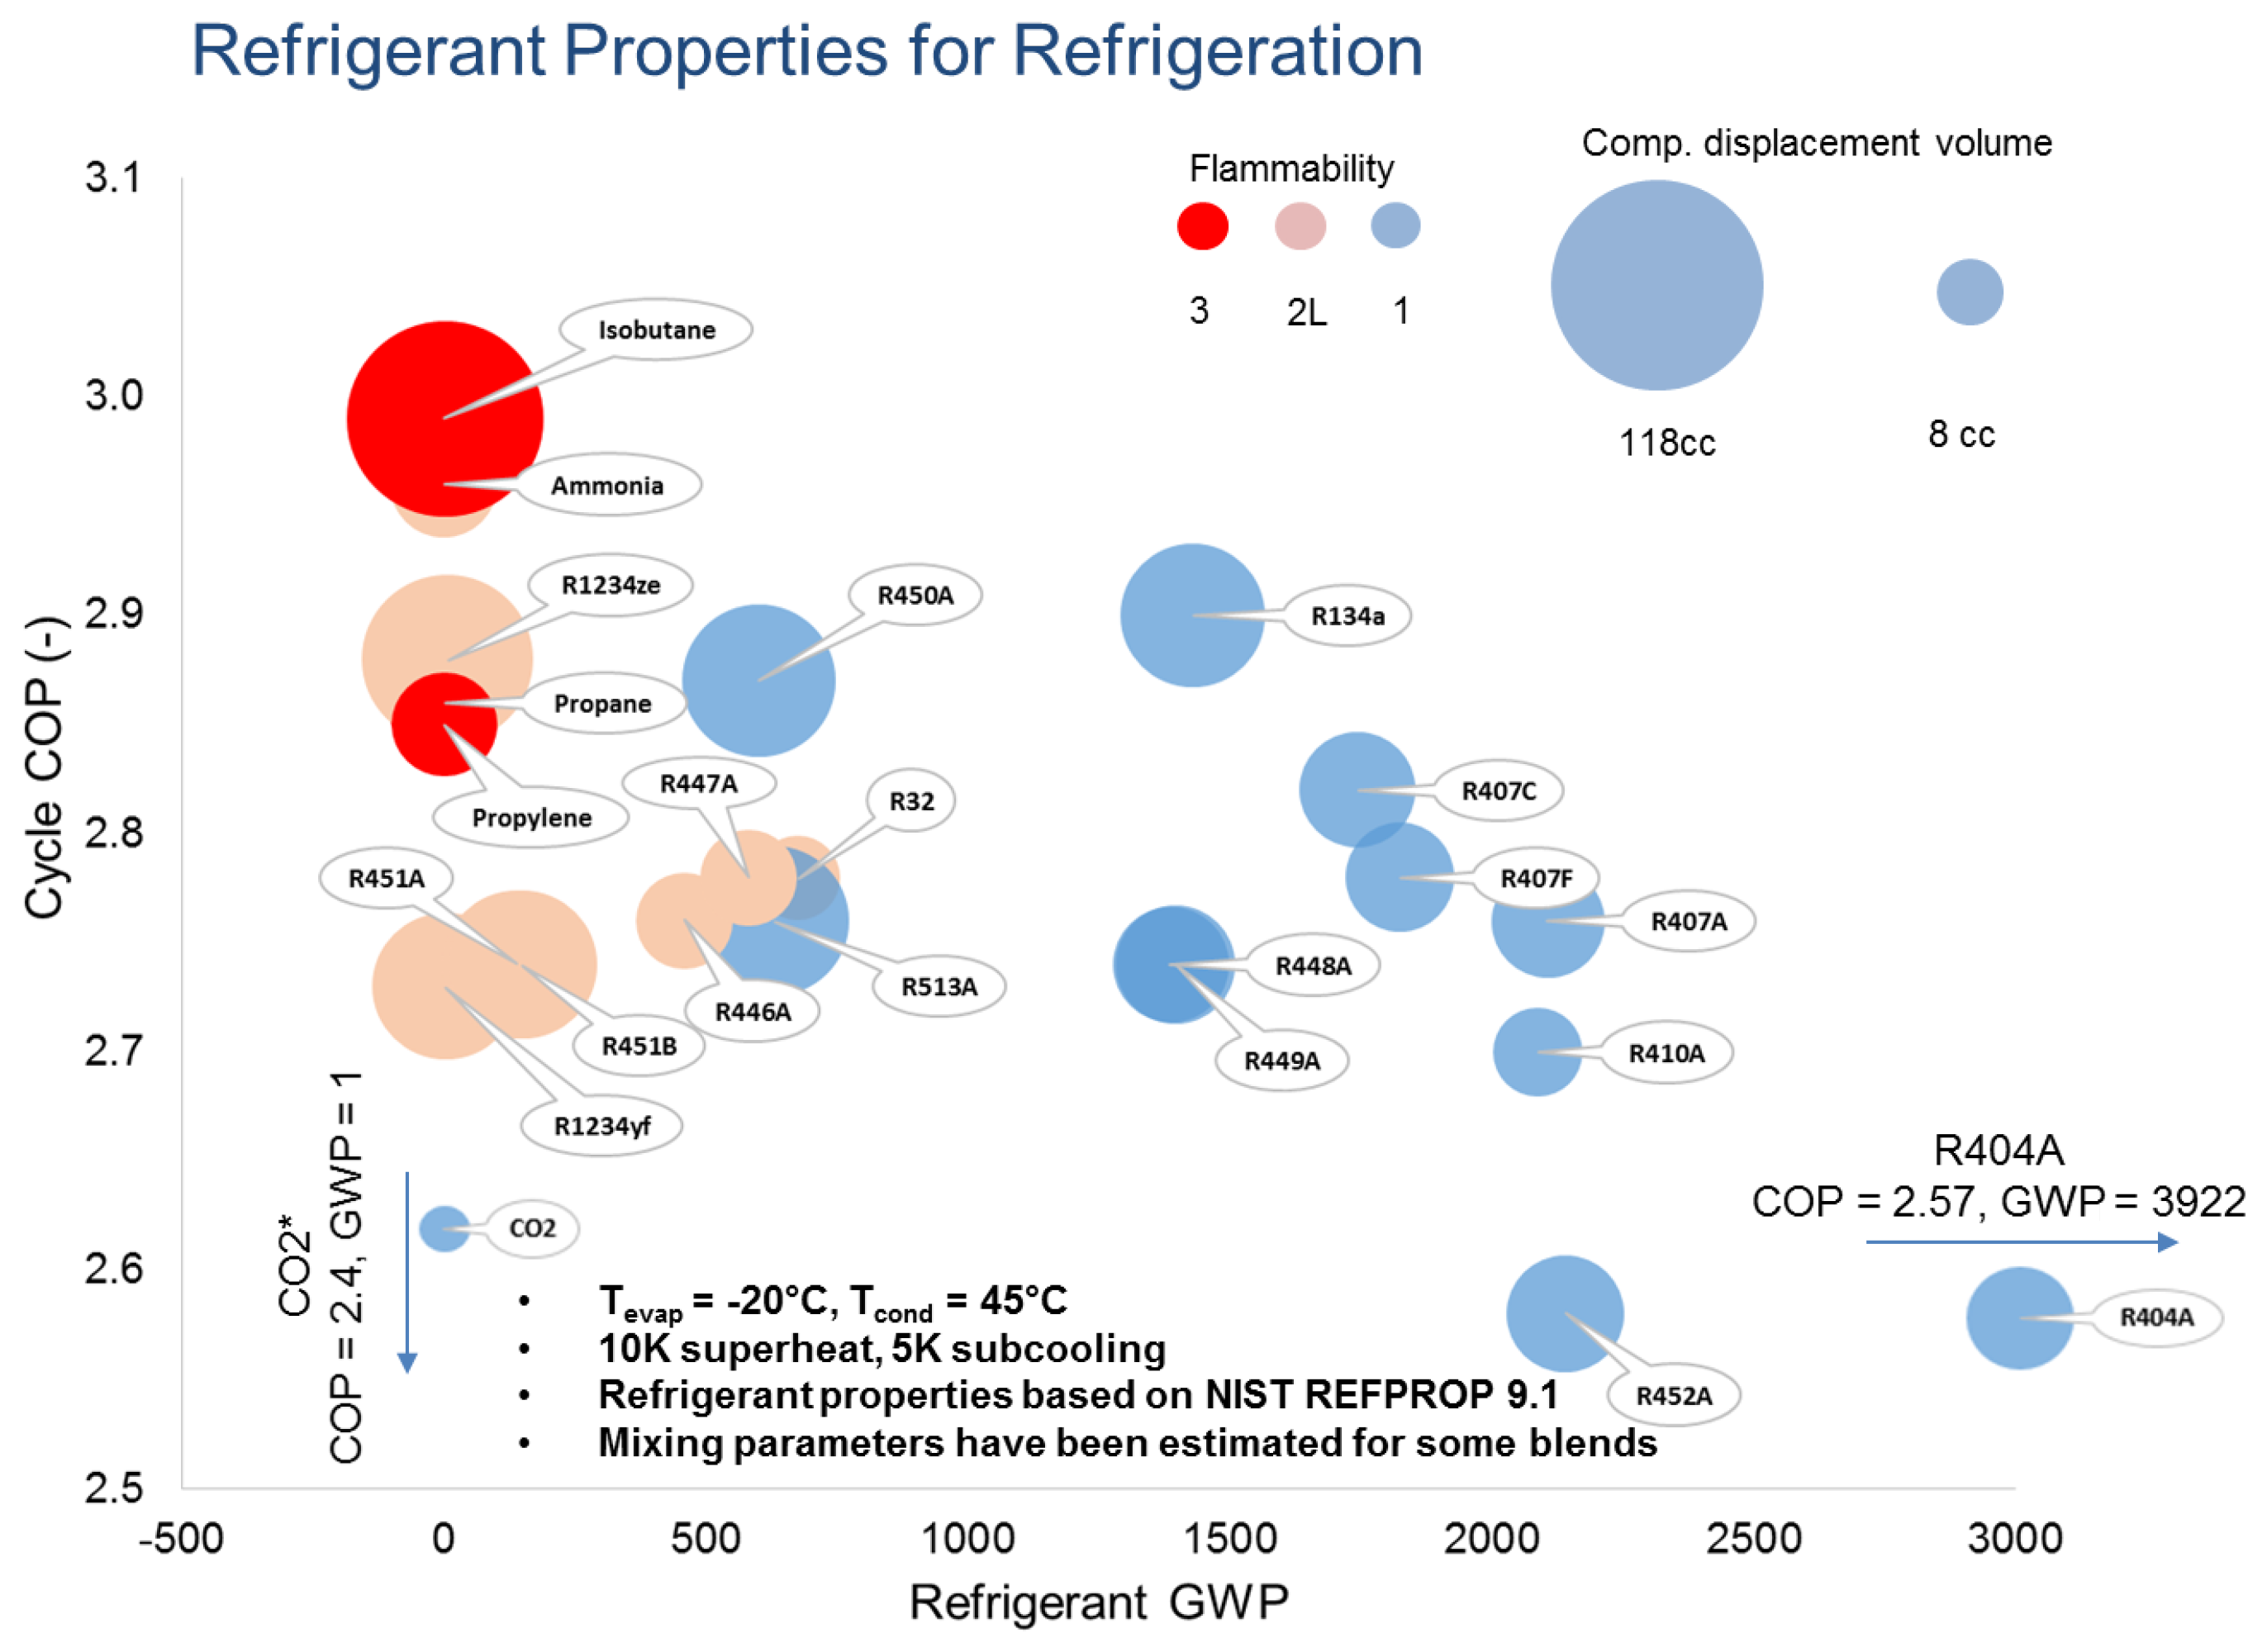 A graph comparing refrigerants based on several properties, including flammability, required compressor displacement volume, GWP and coefficient of performance (COP). COP for a refrigeration system is the ratio of the heat removed from the cooled space to the work performed to remove that heat. Source: Optimized Thermal Systems, Inc. (Click image to enlarge.)